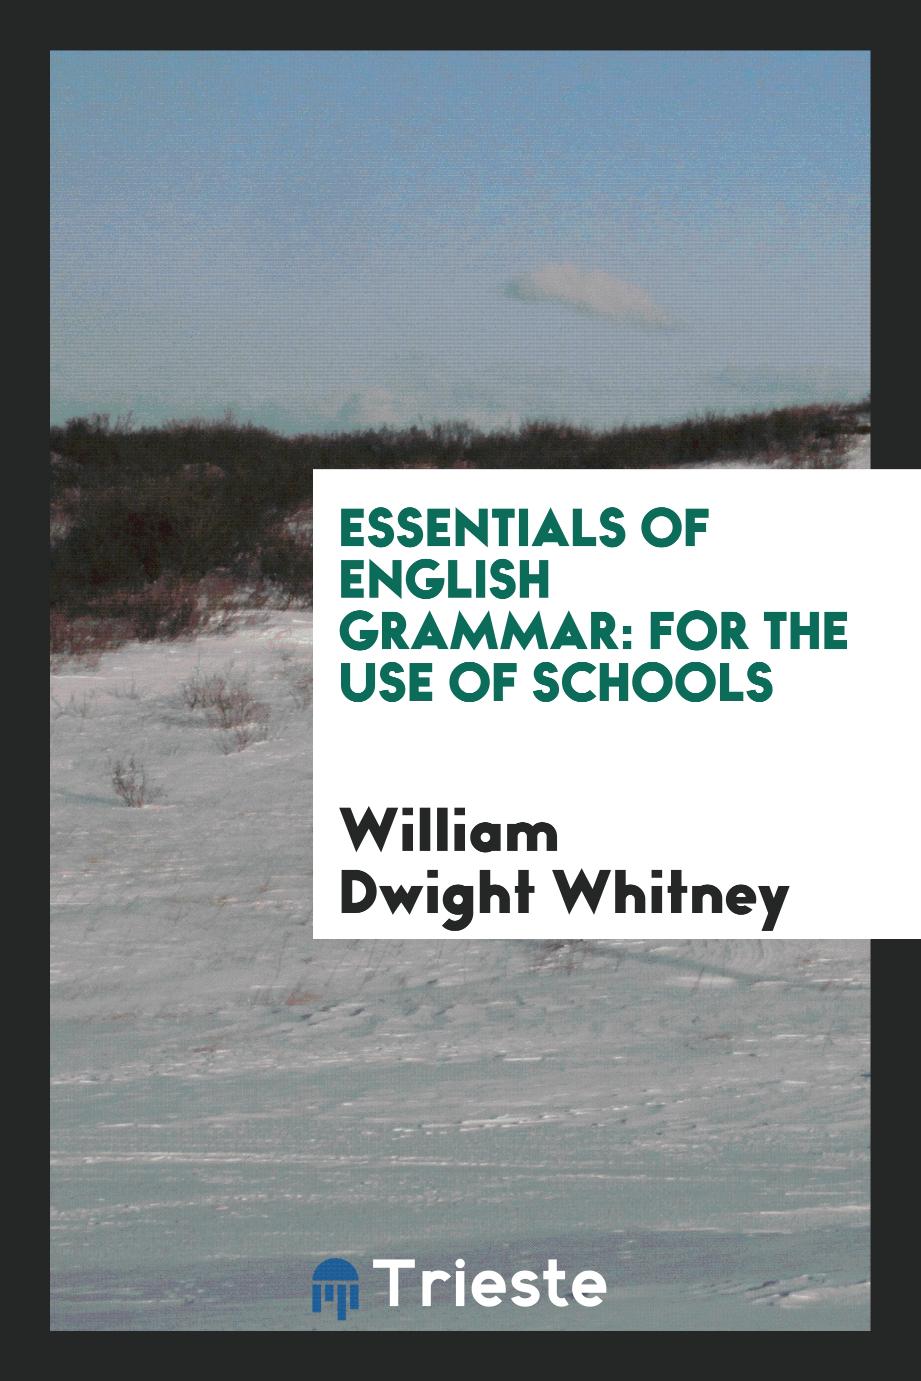 William Dwight Whitney - Essentials of English Grammar: For the Use of Schools